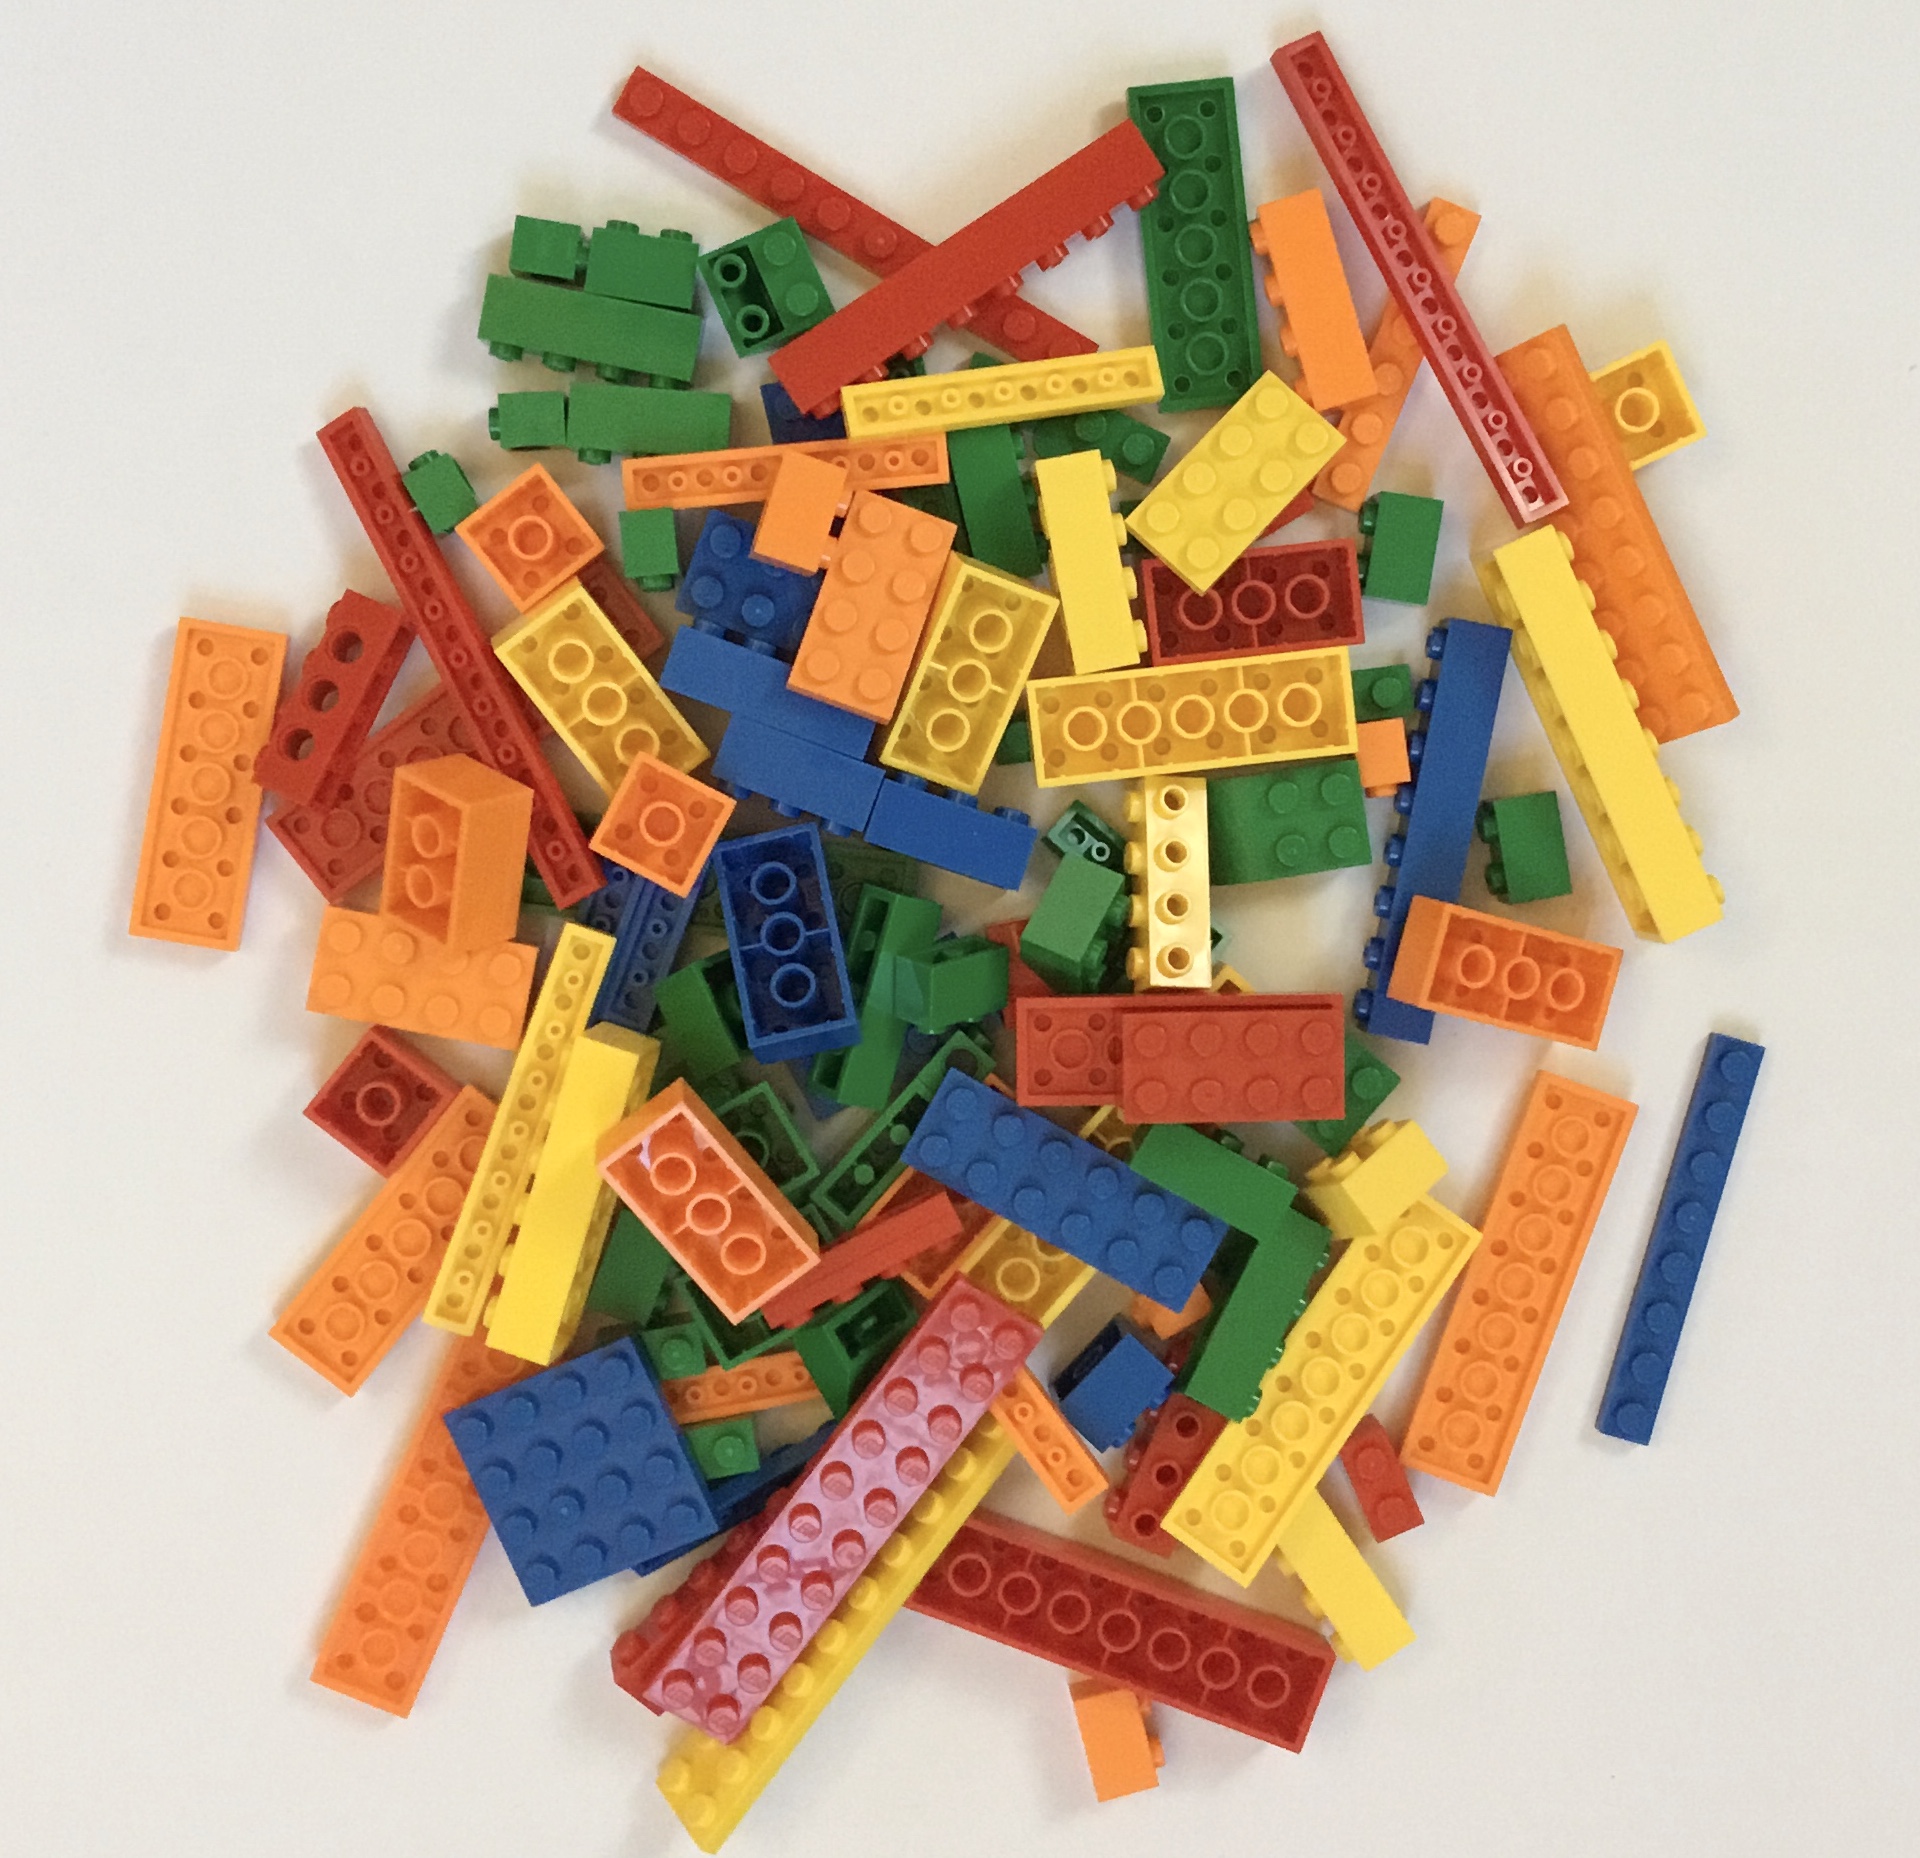 Let's Build with Lego! (Grades 1-4)